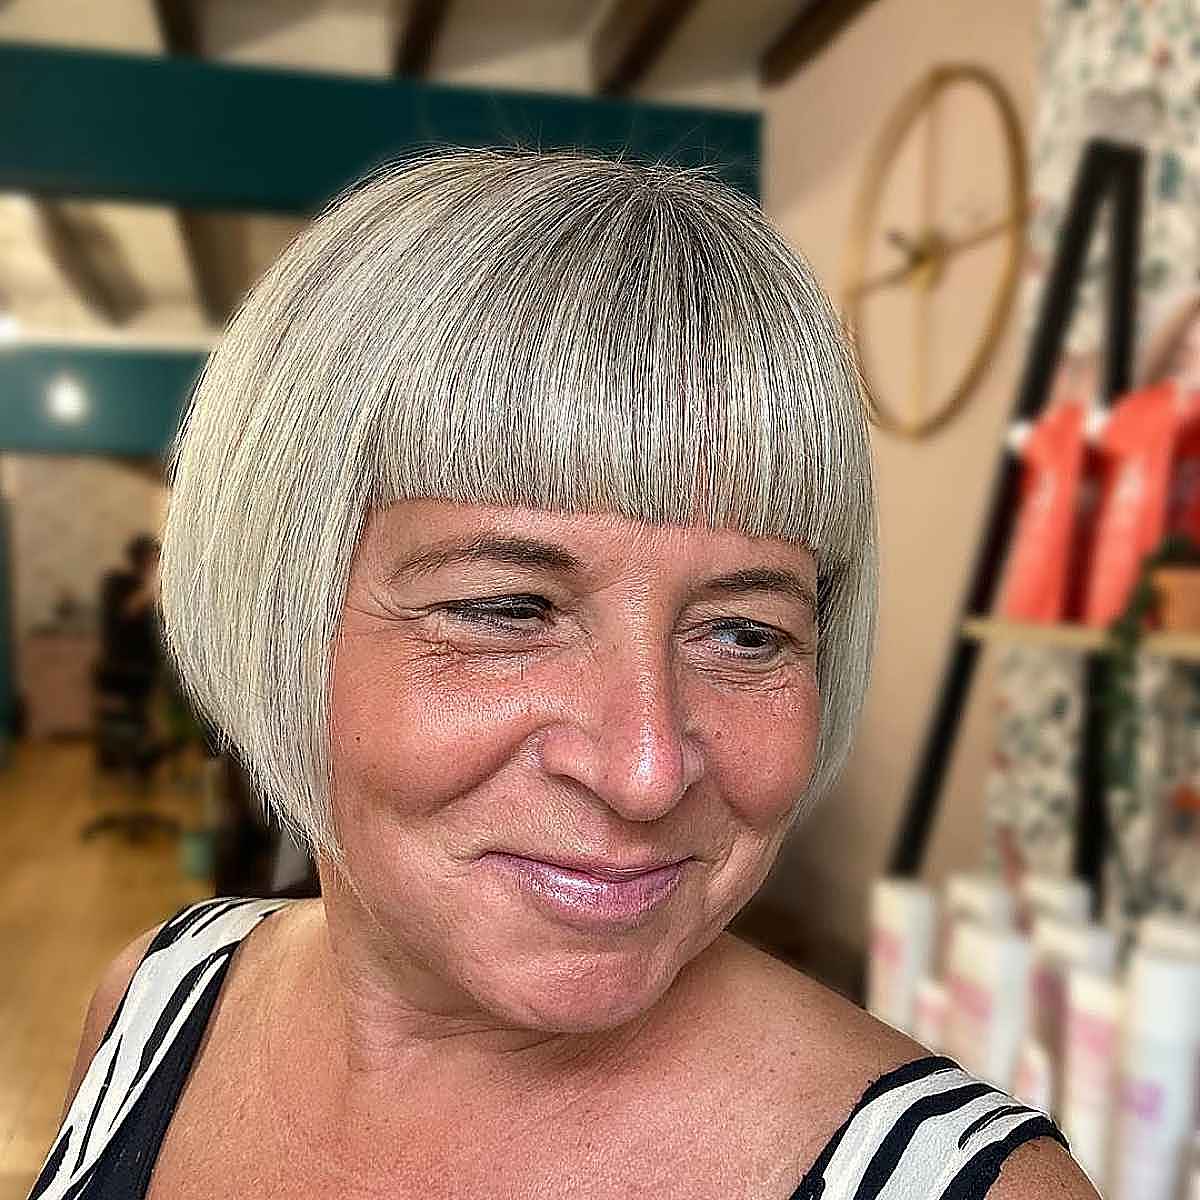 20 Volume-Boosting Bob Haircuts for Women Over 60 with Fine Hair